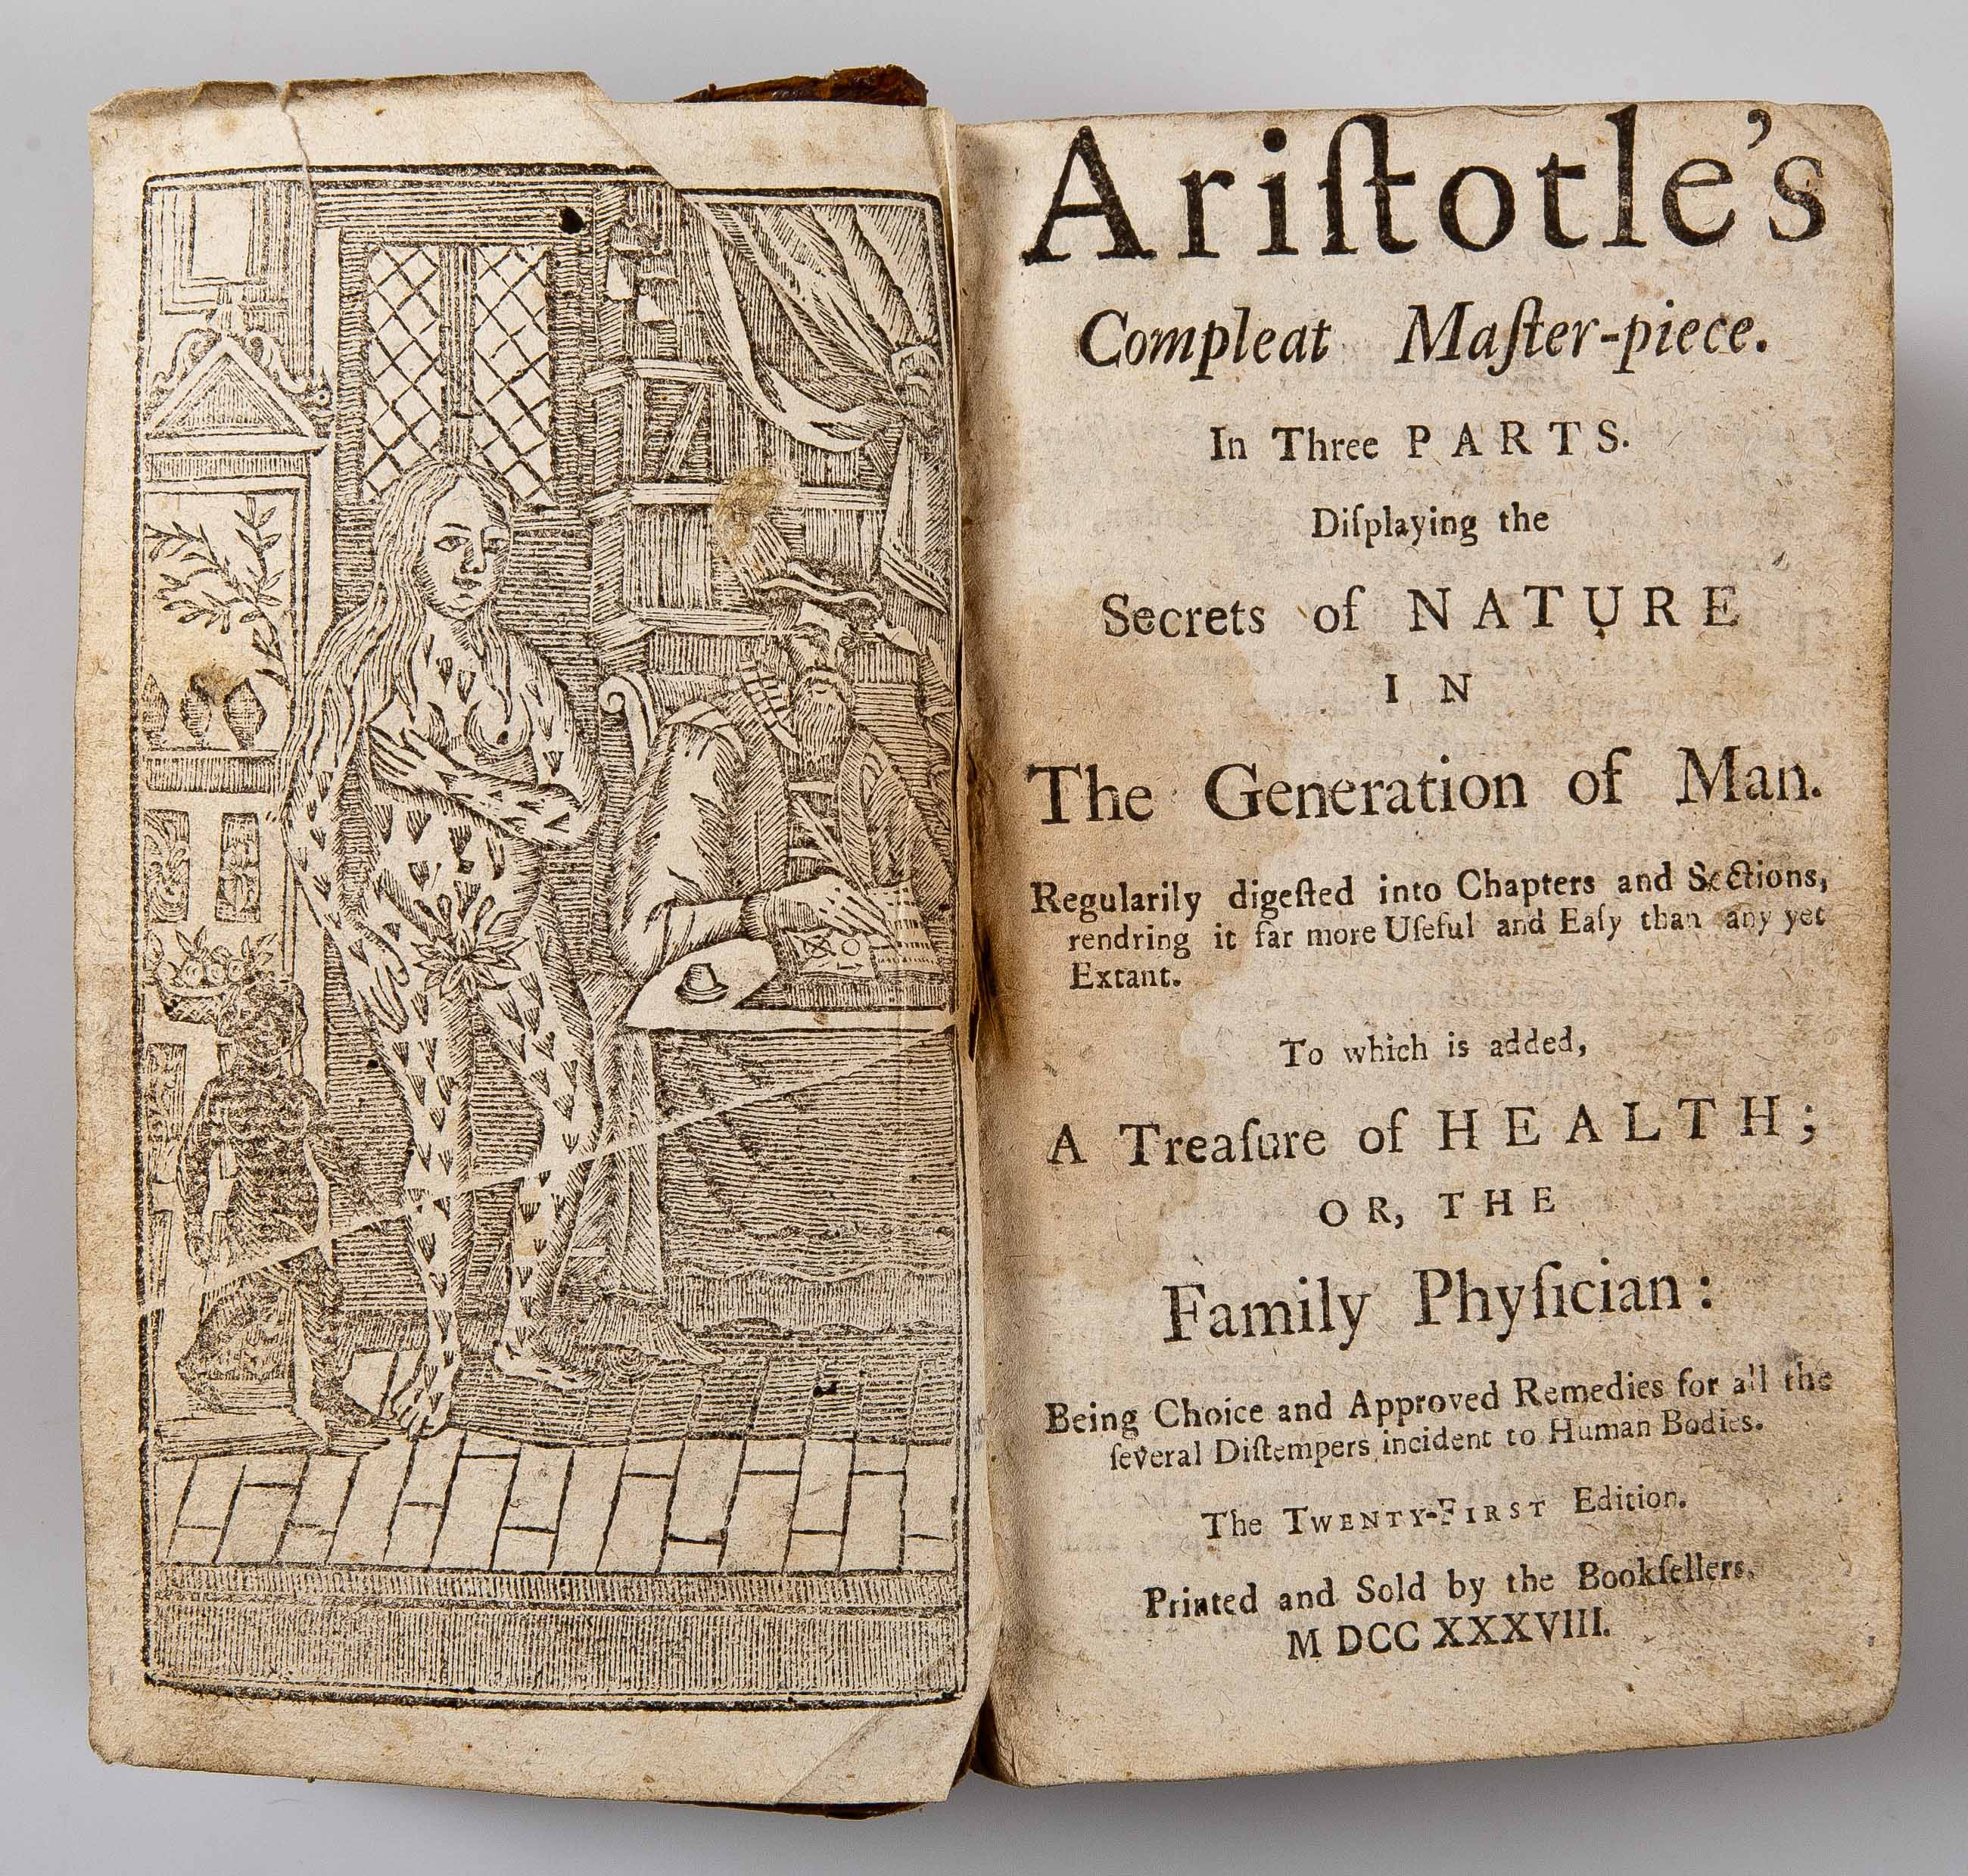 Aristotle on all fronts: Four 18th century editions bound in one volume